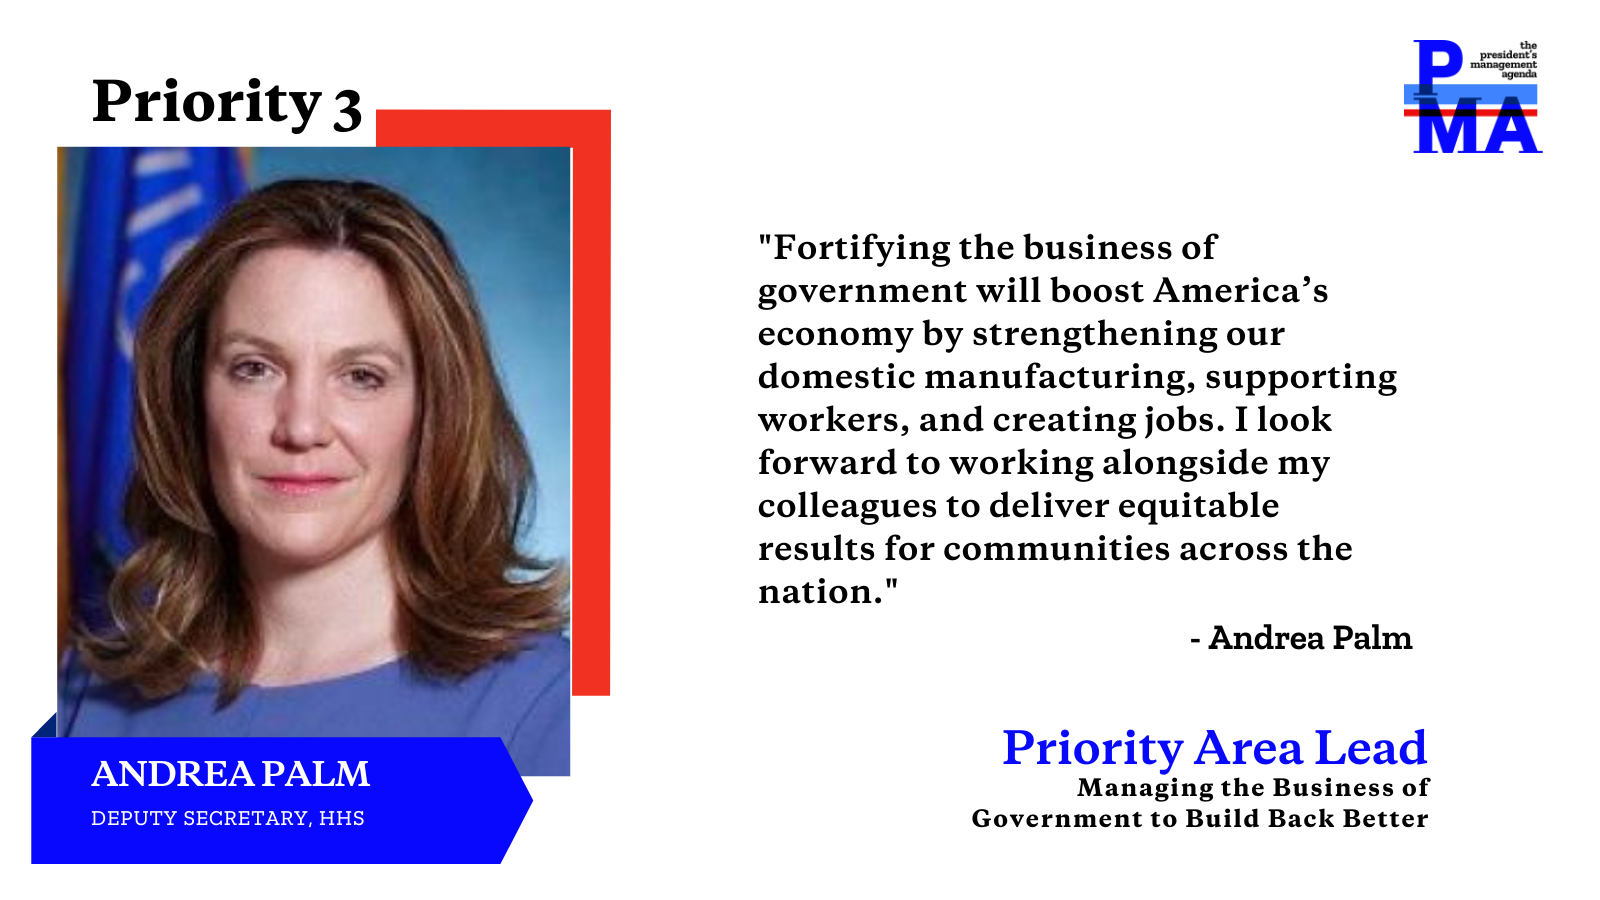 Social card of Andrea Palm with text: Fortifying the business of government will boost America's economy by strengthening our domestic manufacturing, supporting workers, and creating jobs. I look forward to working alongside my colleagues to deliver equitable results for communities across the nation.